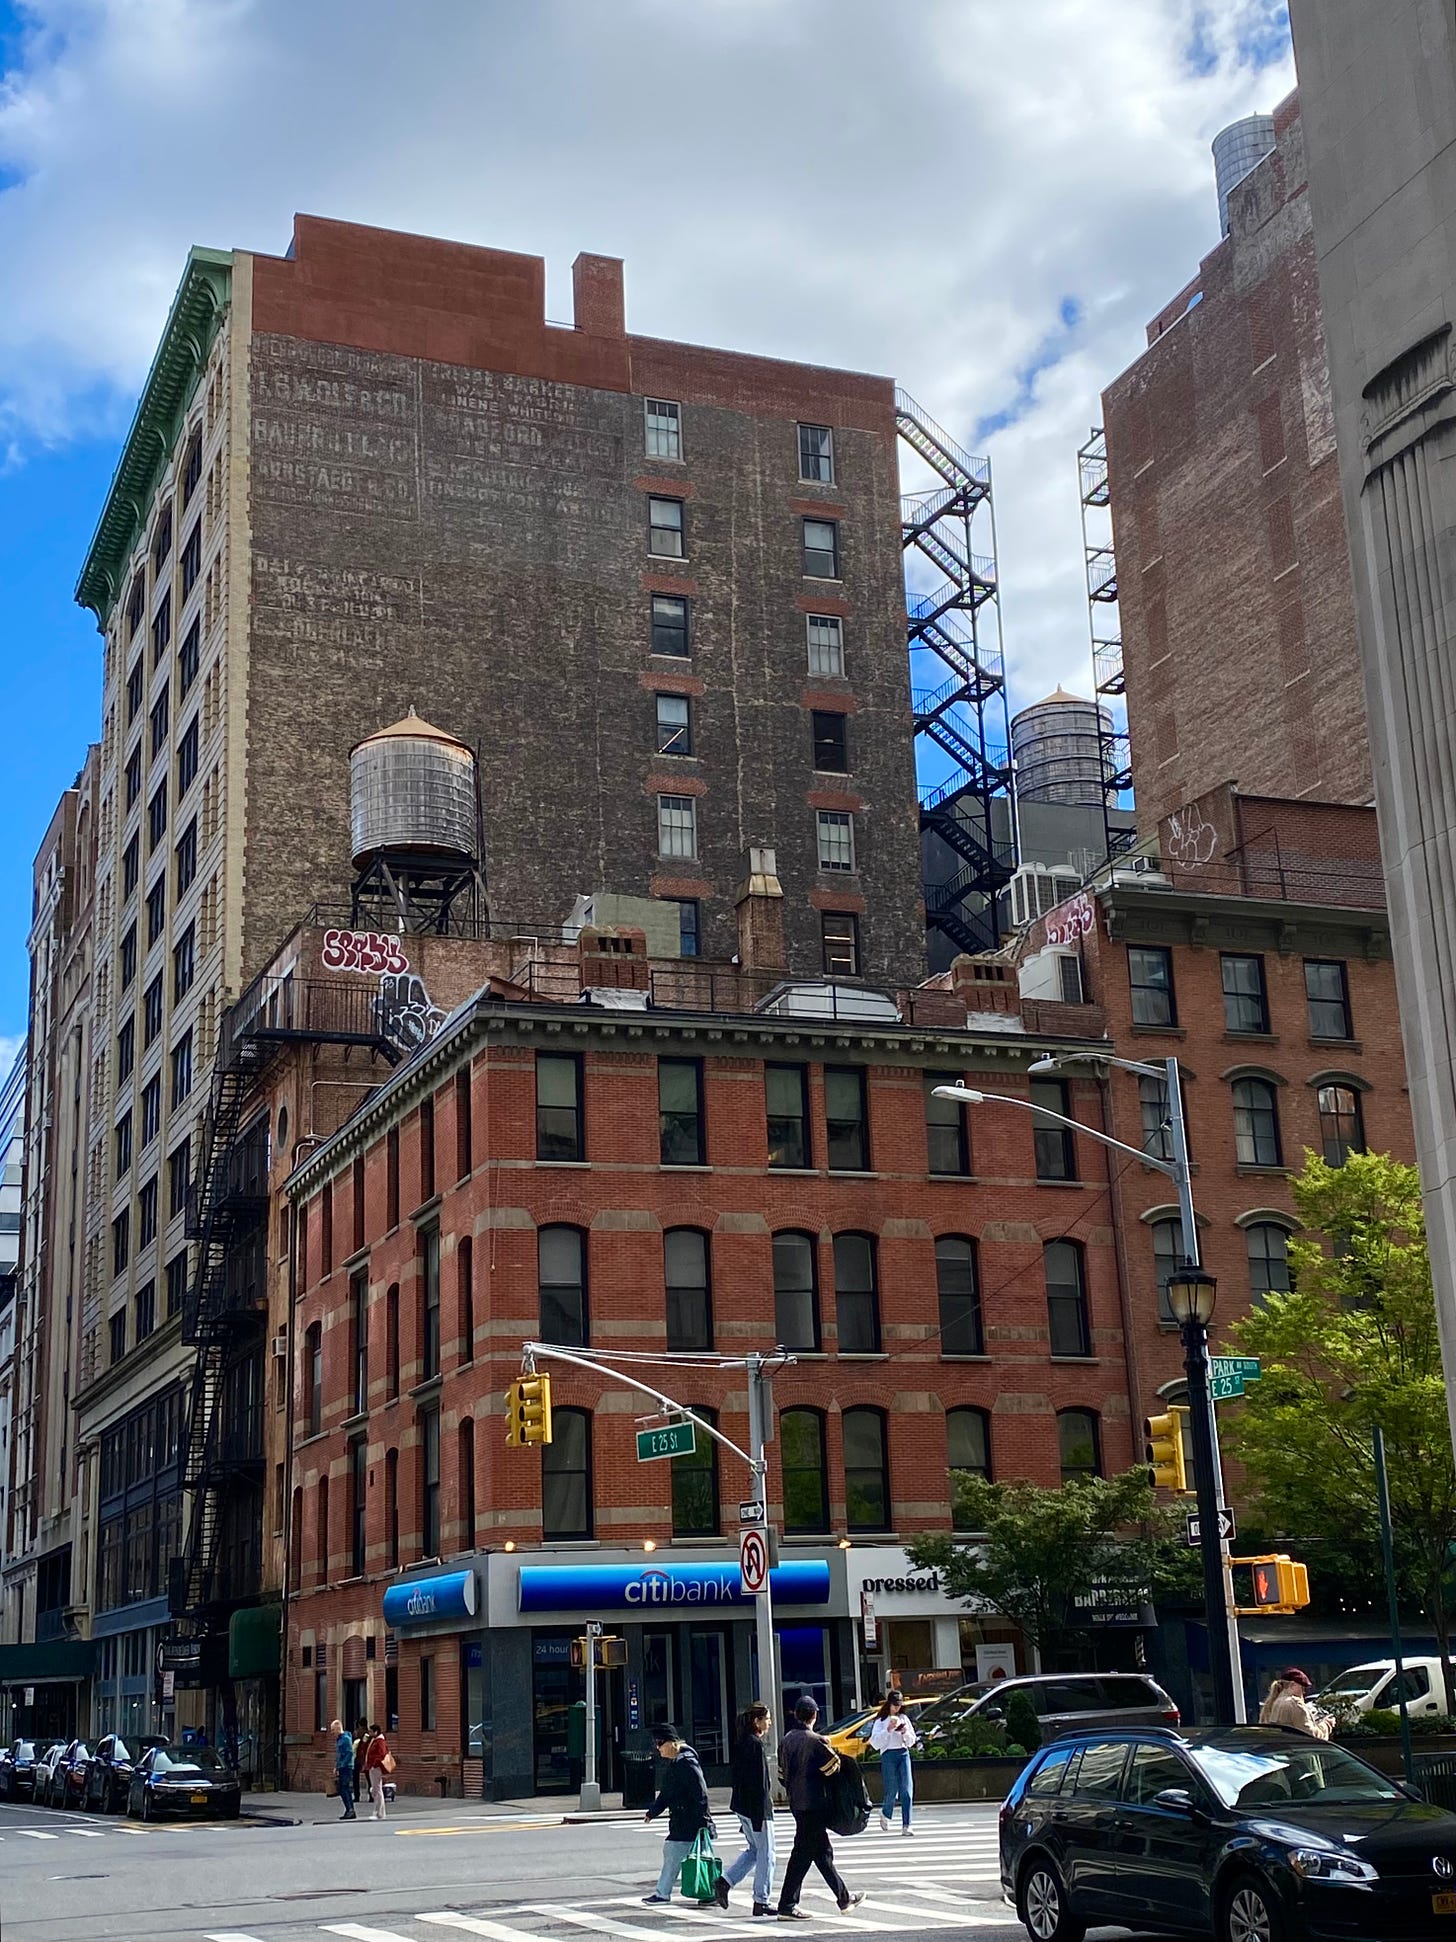 A low red brick building with a Citibank in in the store front. East of it on 25th street is a taller brick building with a water tower on its roof. The taller building east of that has faded advertisements on the brick exterior. South of the Citibank is another brick building beside a taller building. A water tower can be seen between the two tallest buildings rear fire escape stairs.